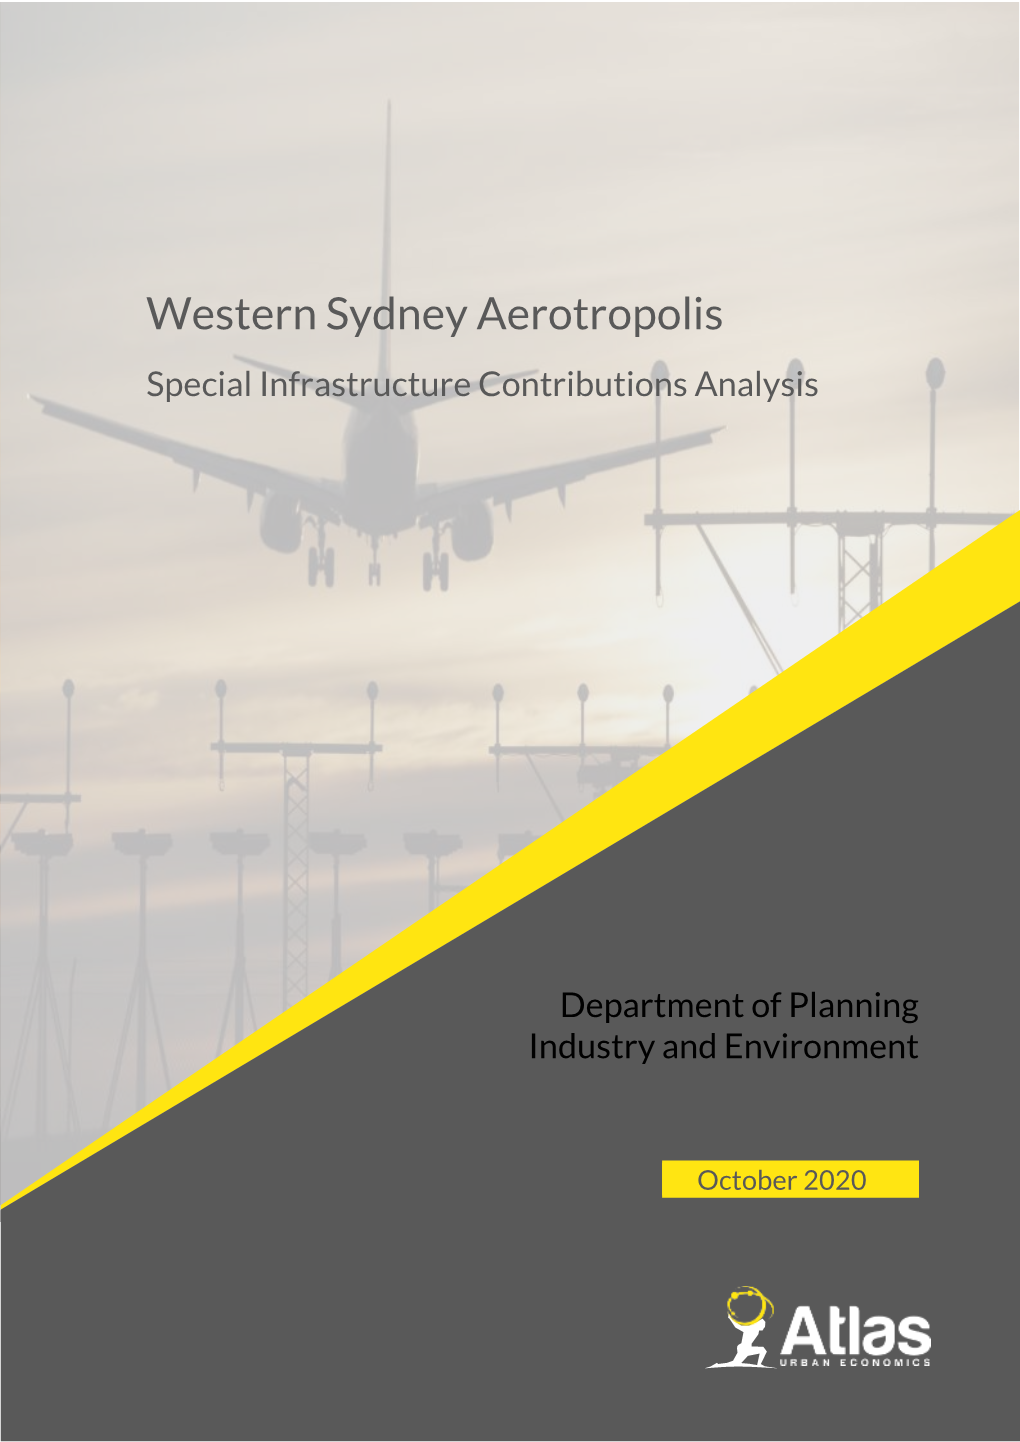 Western Sydney Aerotropolis Special Infrastructure Contributions Analysis